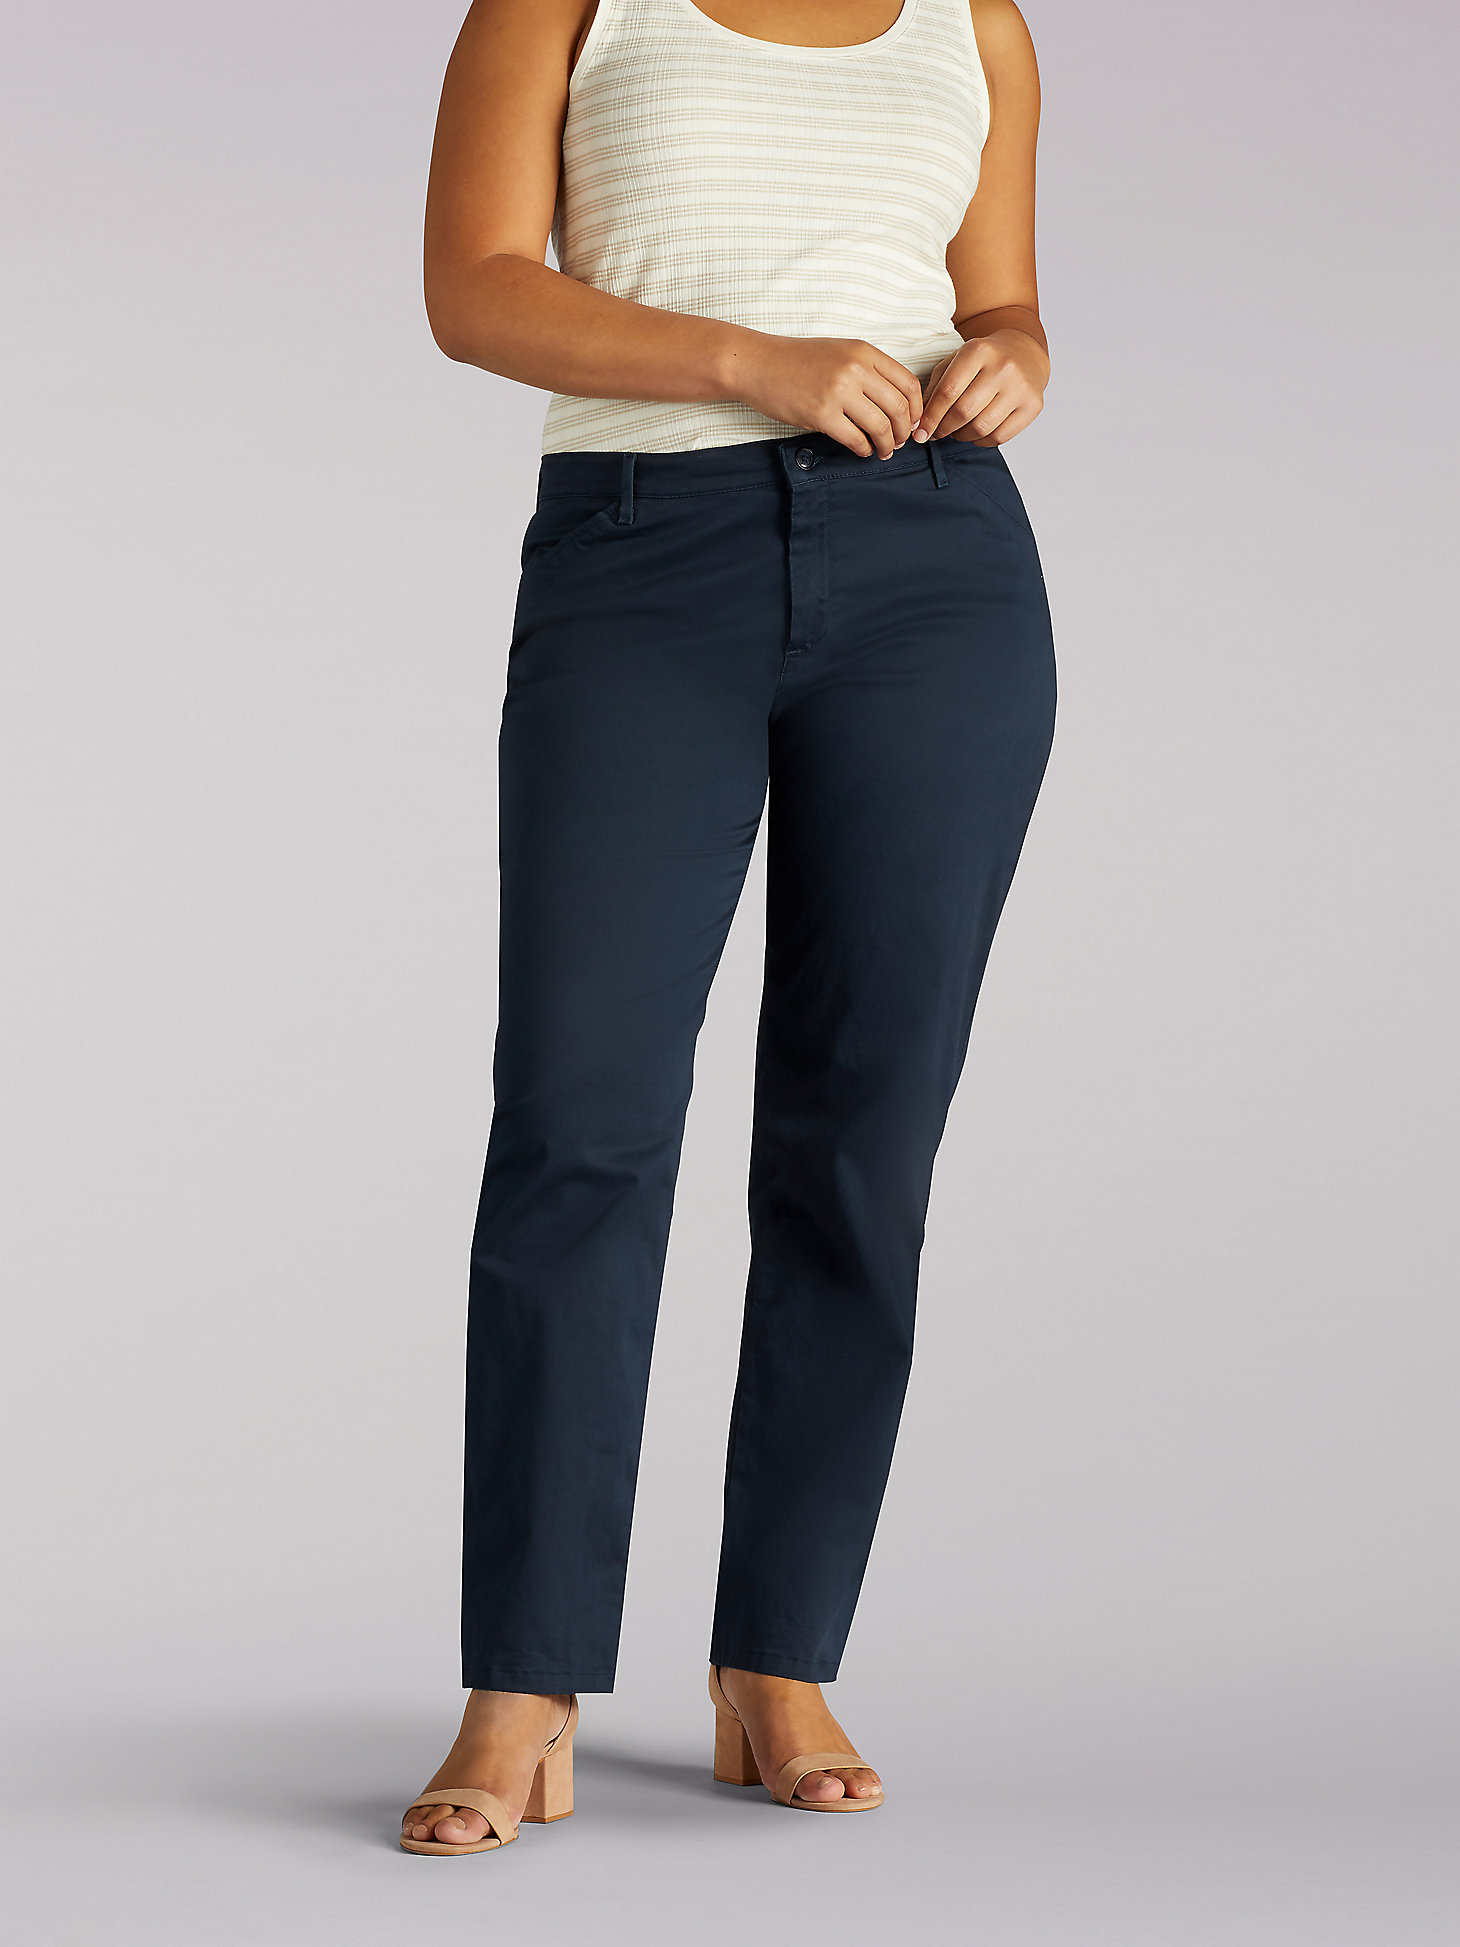 LEE Women’s Relaxed Fit All Day Straight Leg Pant 